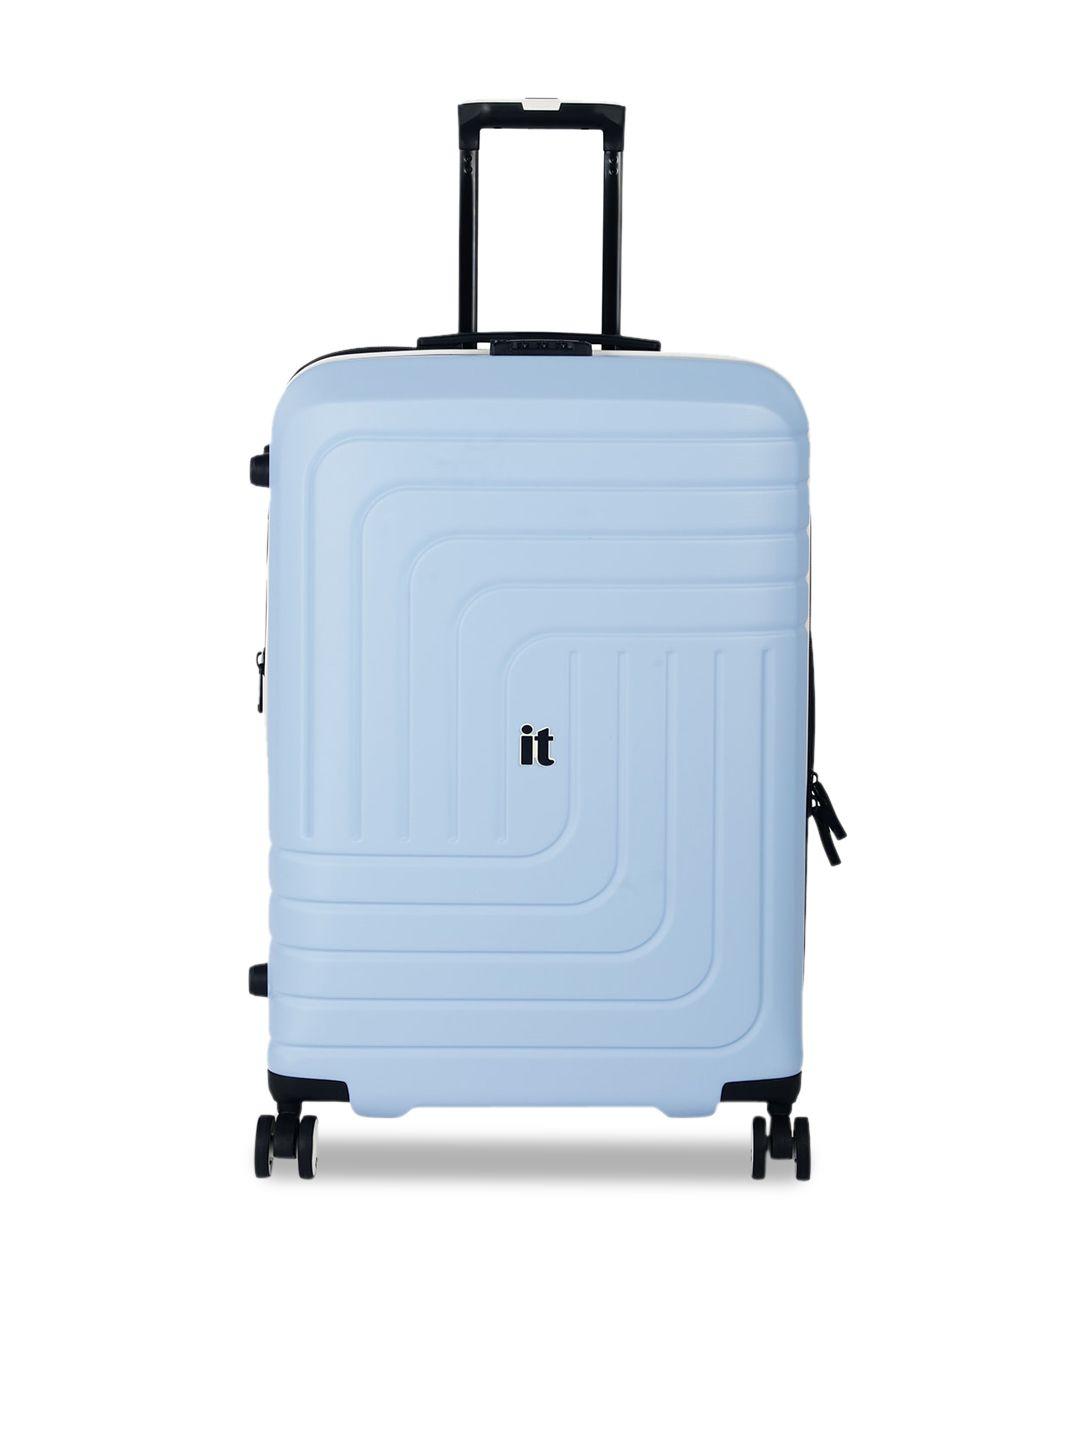 IT luggage Convolved Textured 24 inches 360-Degree Rotation Hard-Sided Trolley Bag